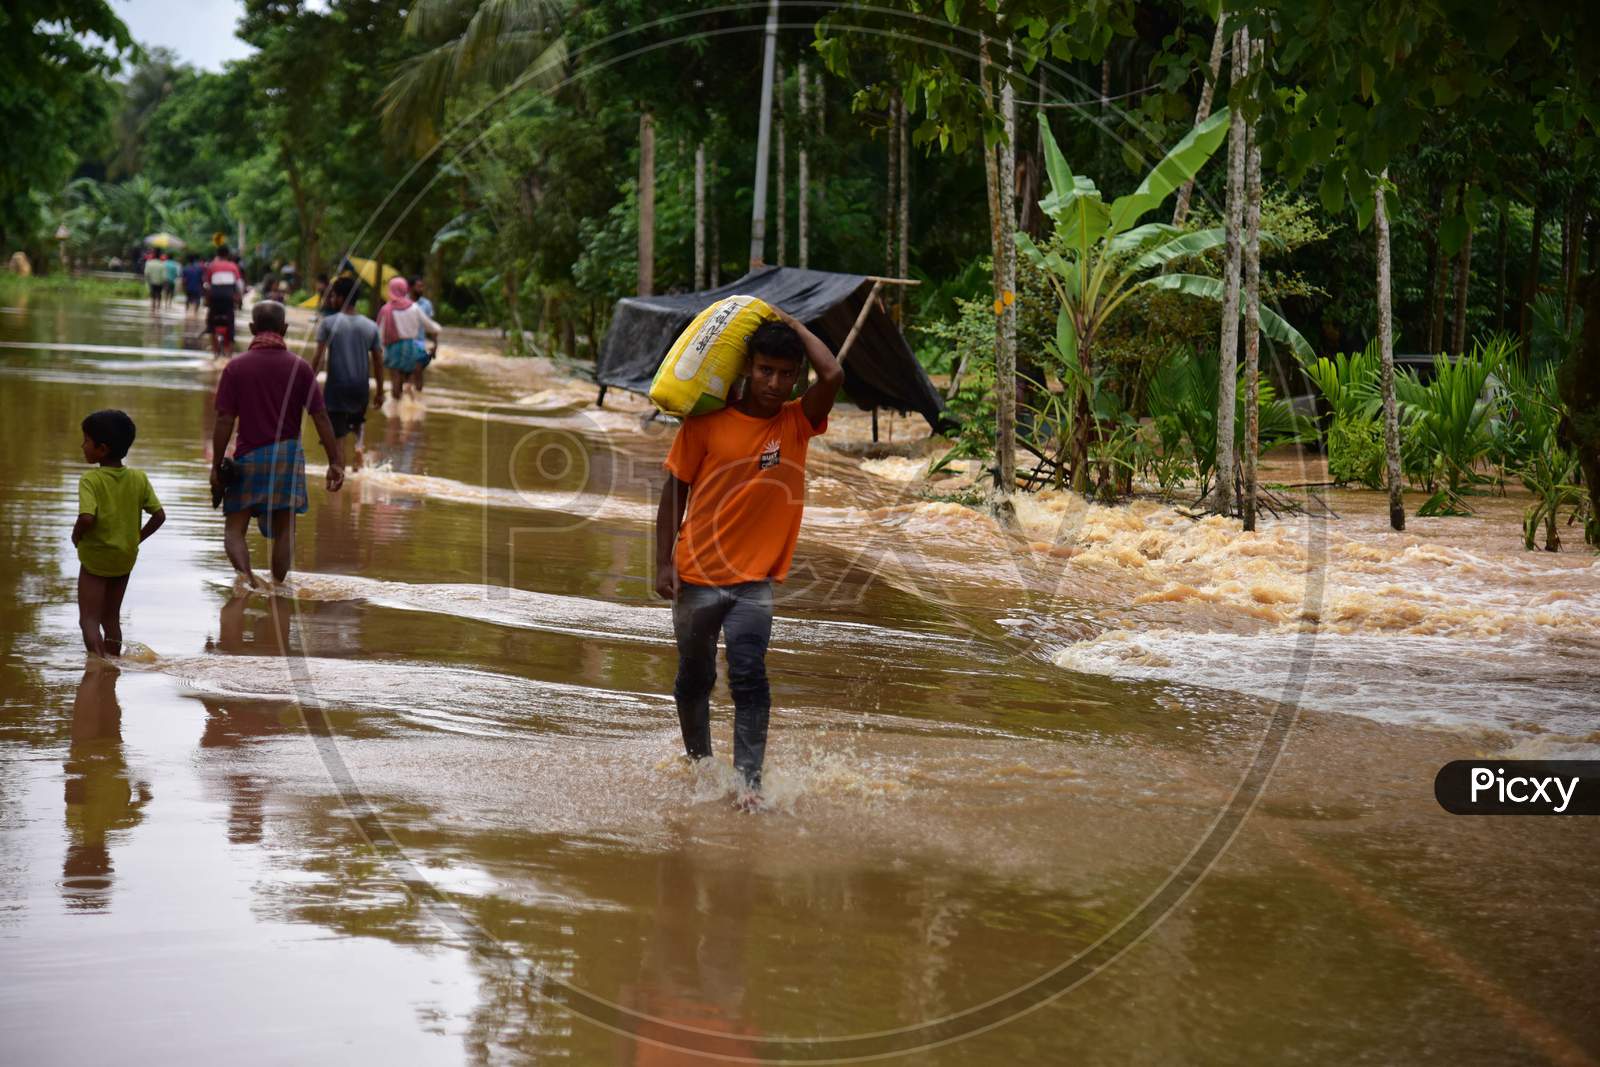 Villagers wade through water-logged road  to a safer place during heavy rain  at Kachua village  in Nagaon district, in the northeastern state of Assam on Sept 26,2020.